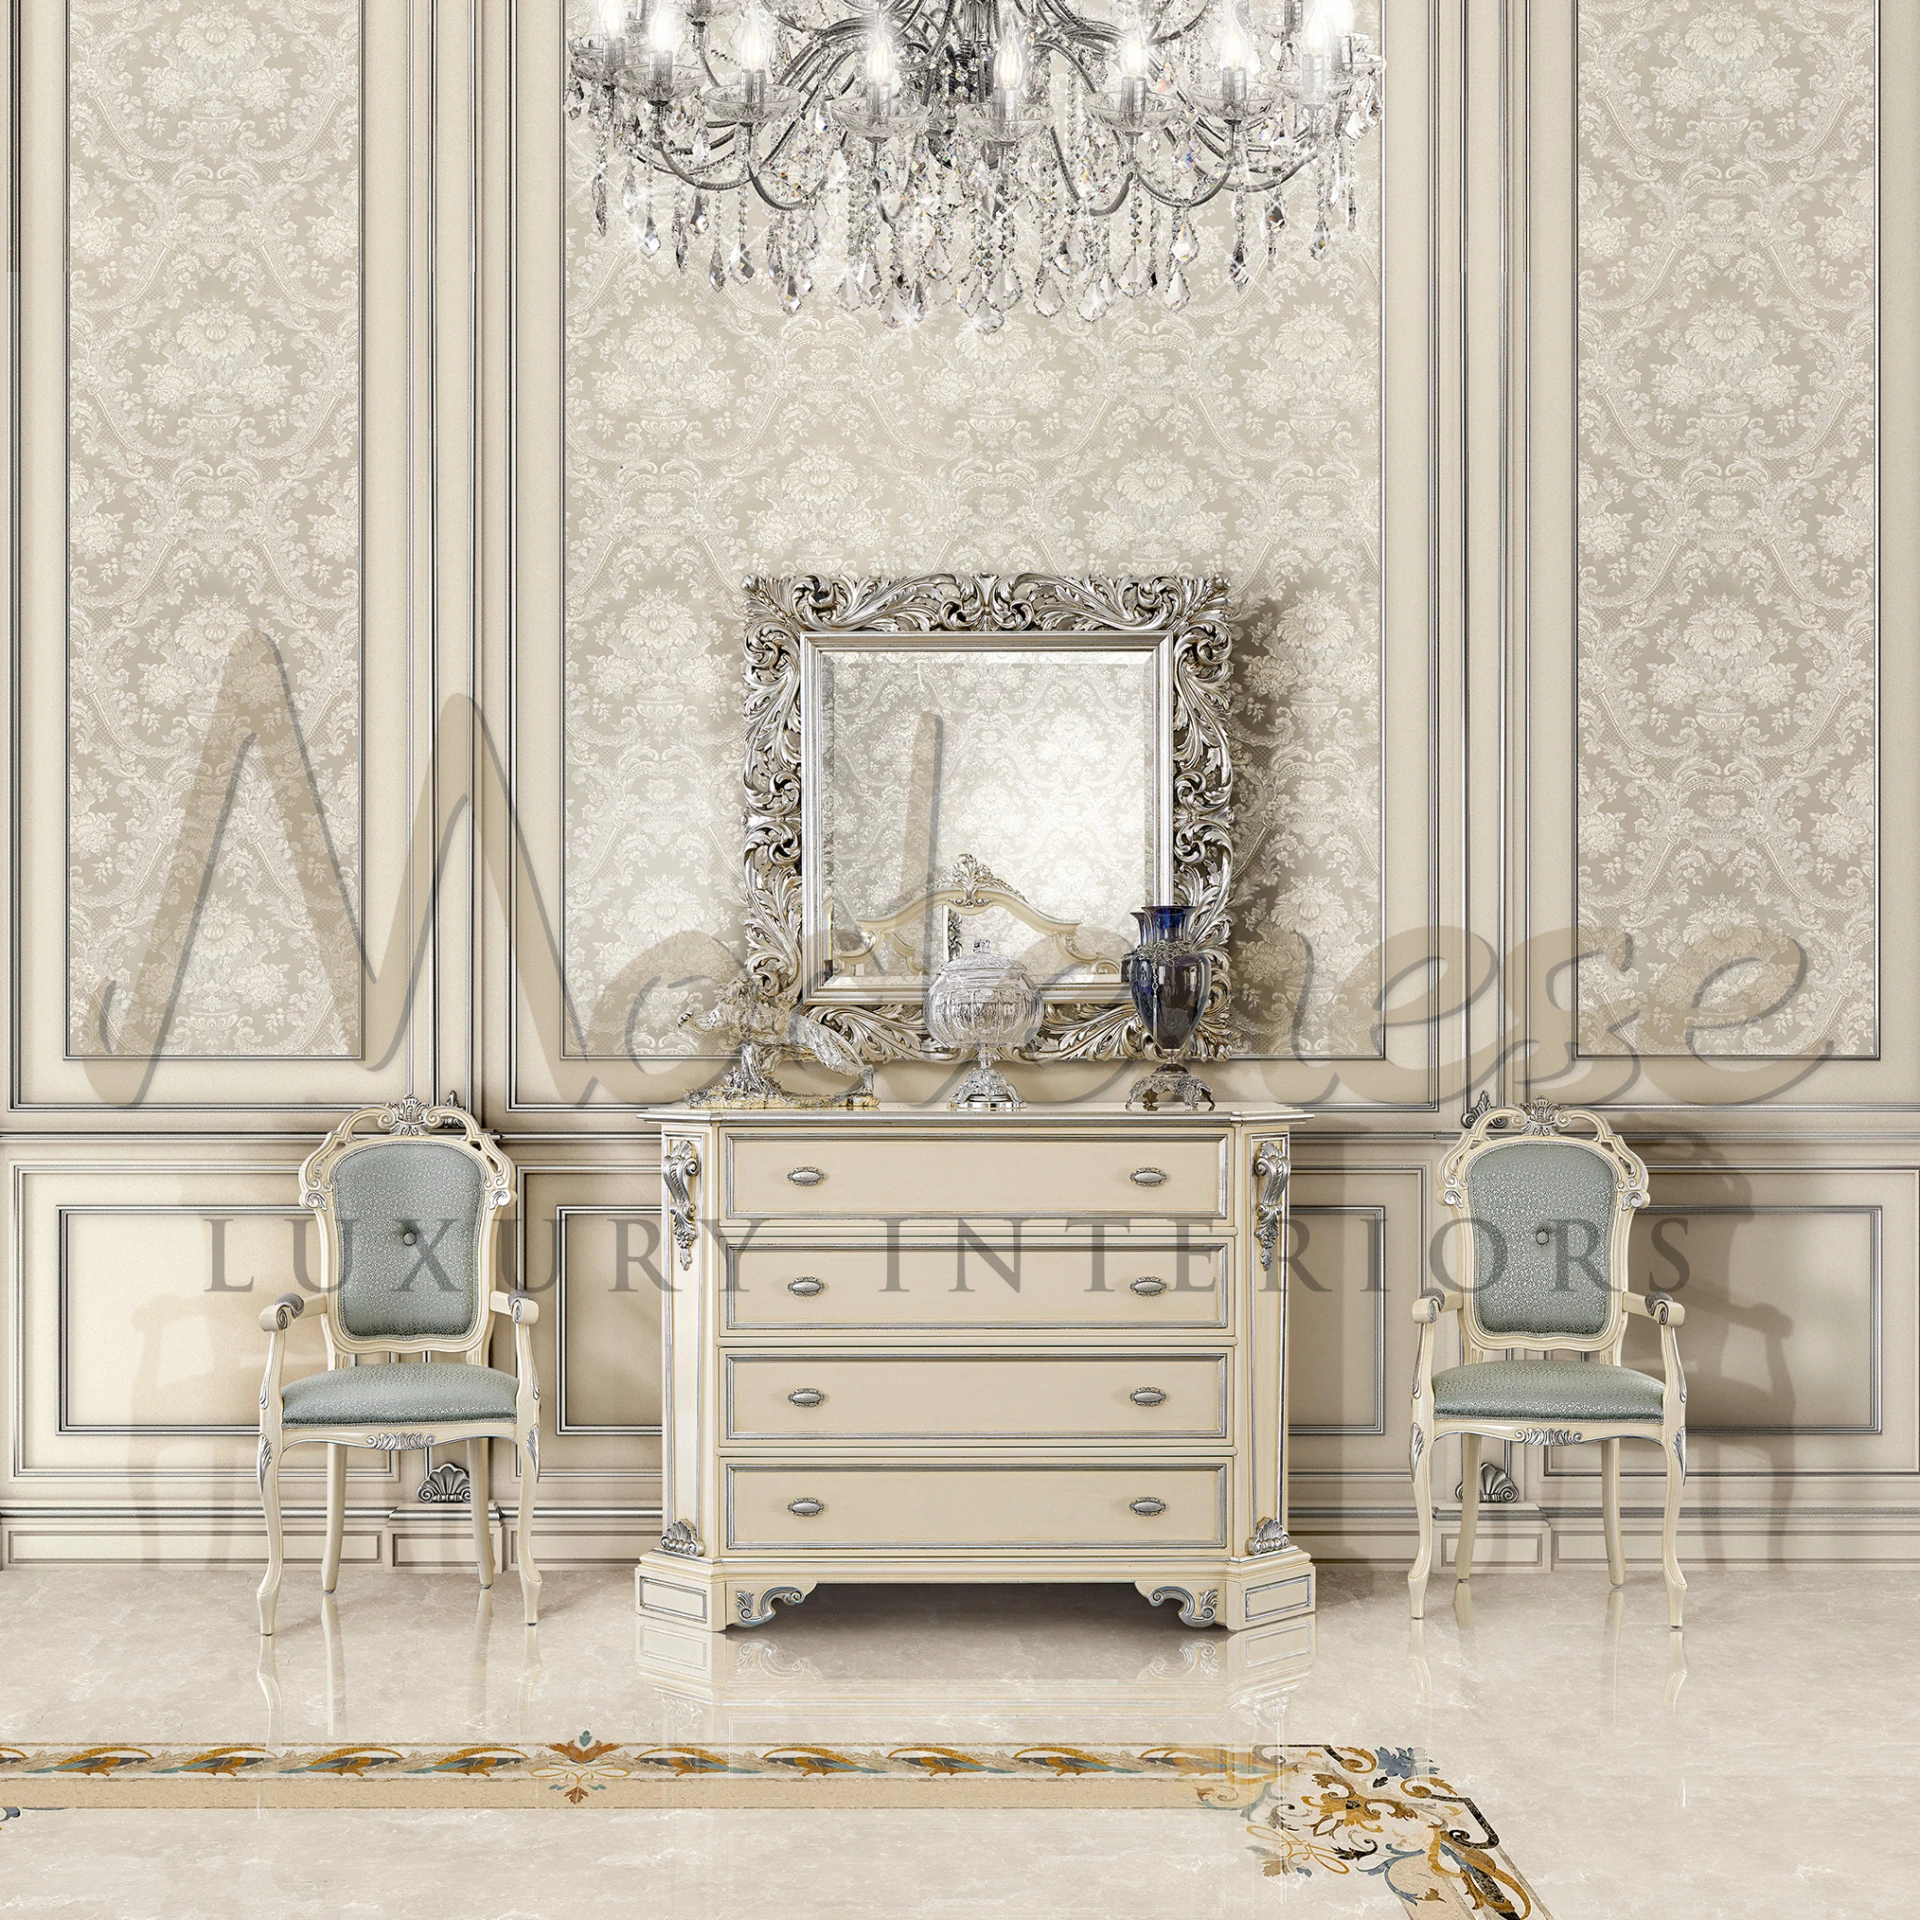 Fancy dresser setup with classic Victorian chairs and ornamental mirror in a luxurious room.